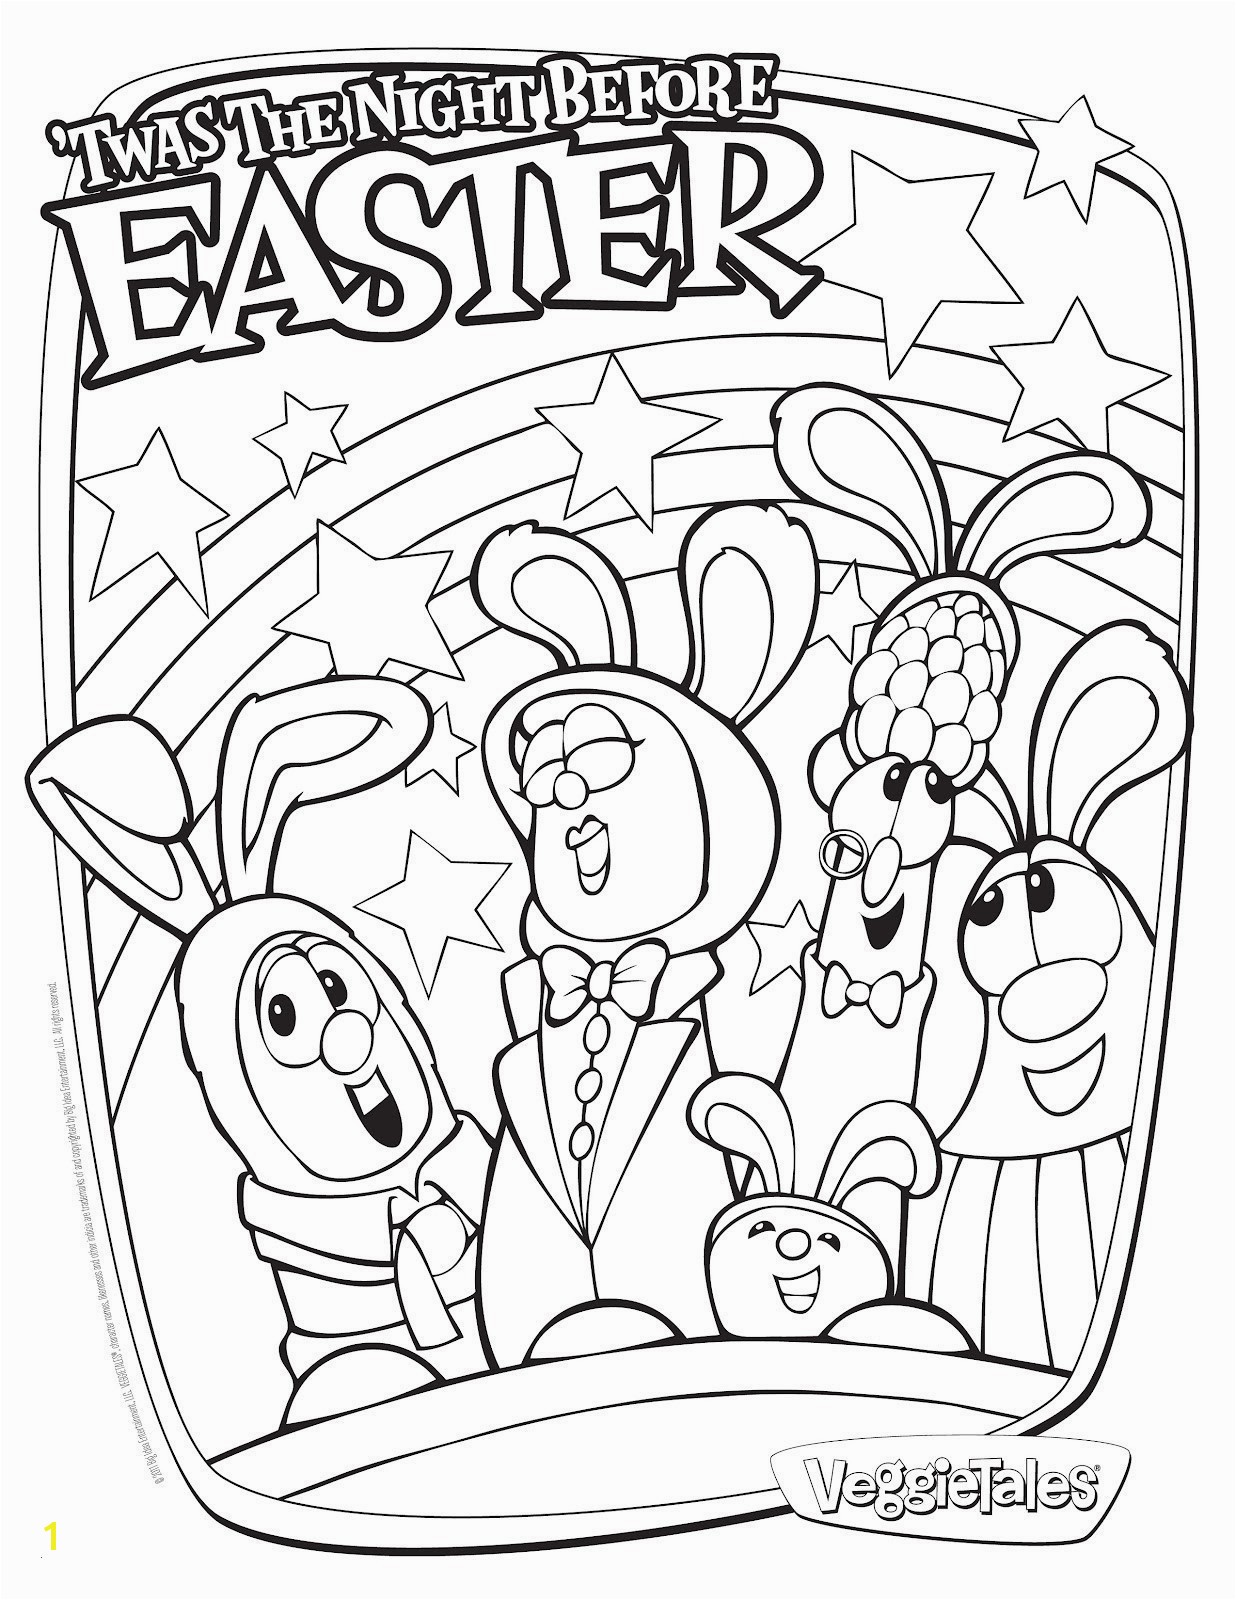 Preschool Religious Easter Coloring Pages Printable 52 Realistic Religious Christmas Coloring Pages Jesus